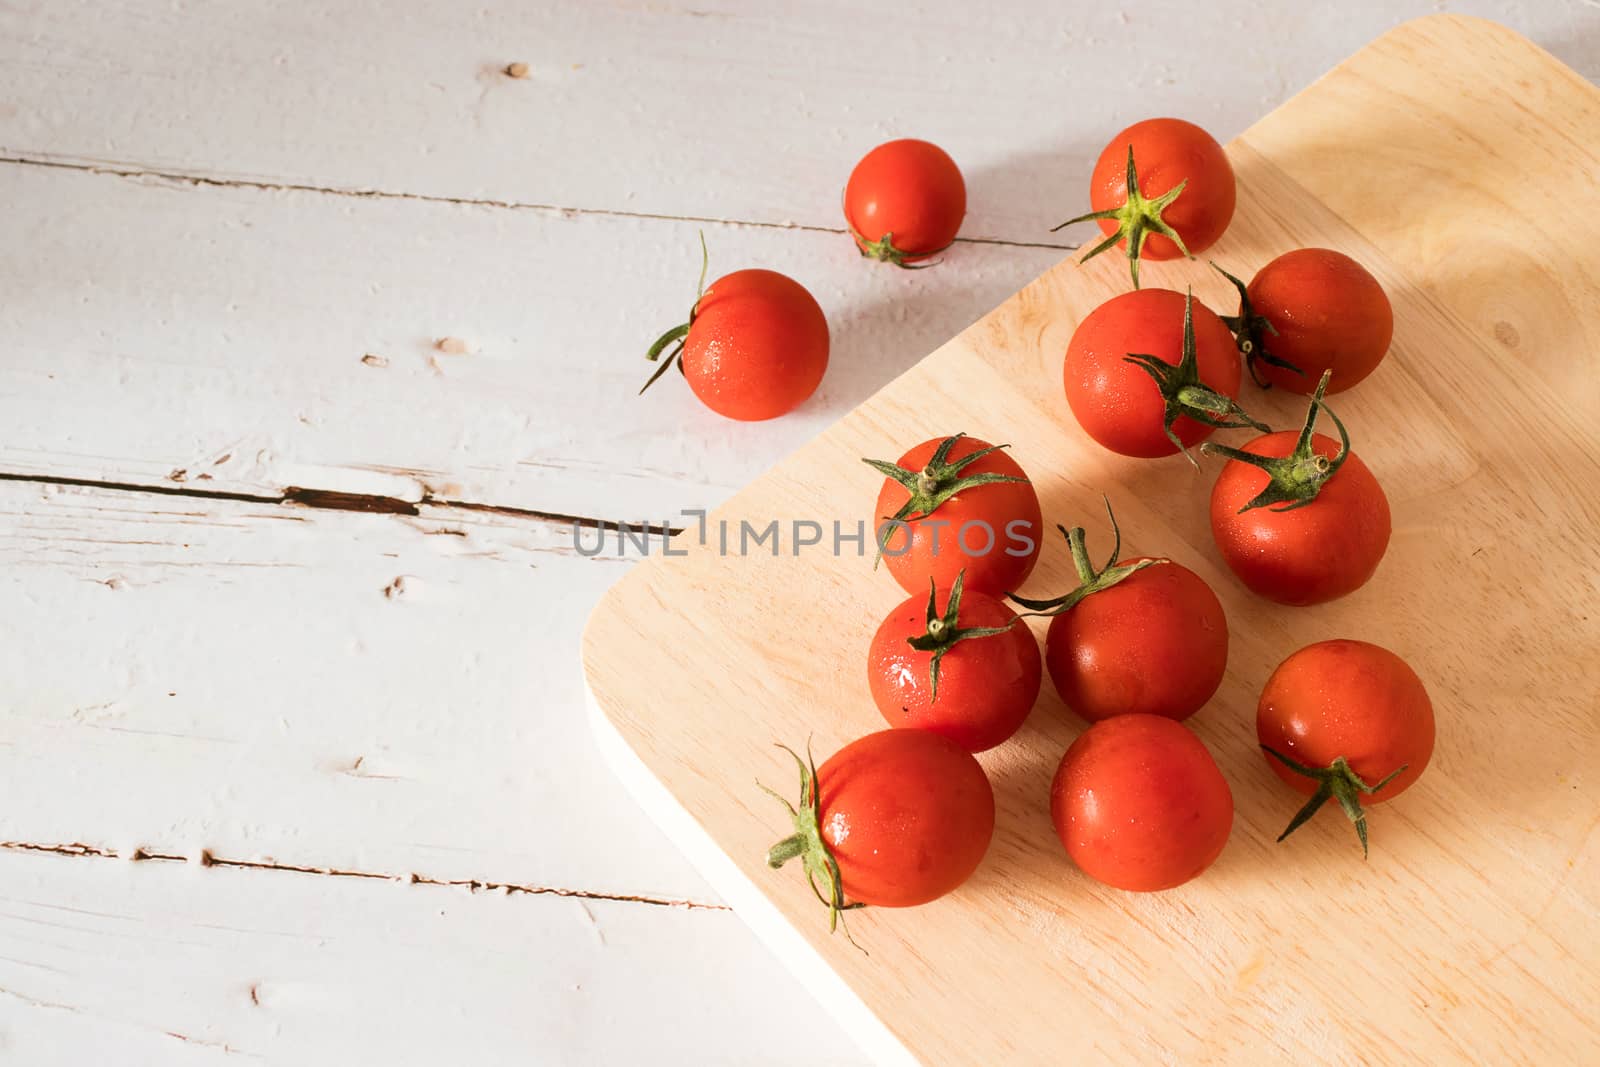 Red tomato on a cutting board wiht wooden background.